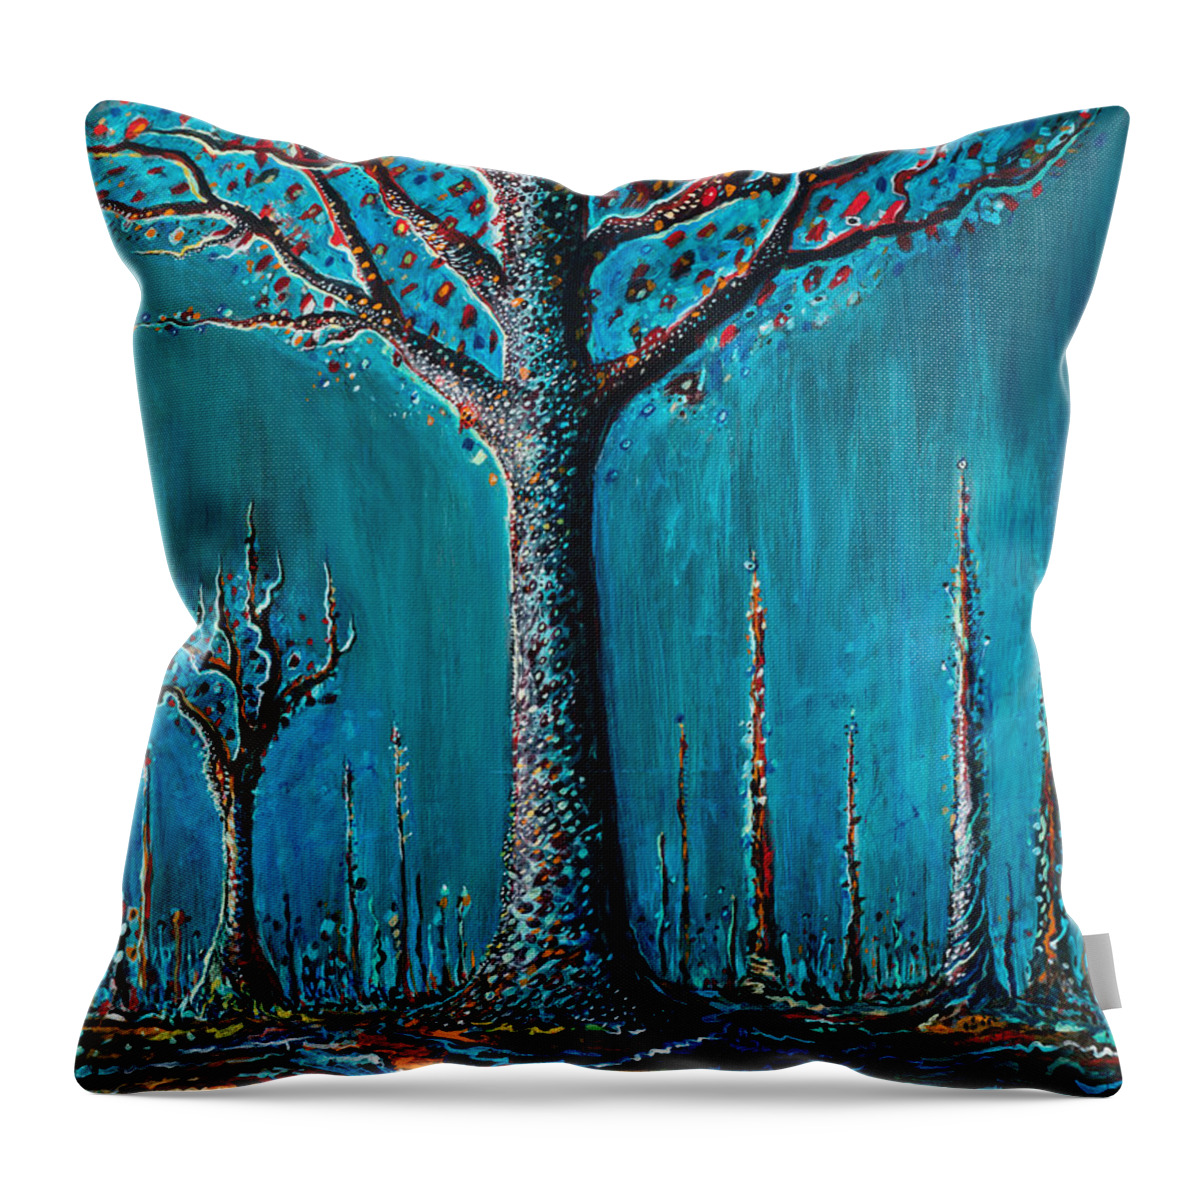 Tree Throw Pillow featuring the painting Sugar Tree by Yom Tov Blumenthal